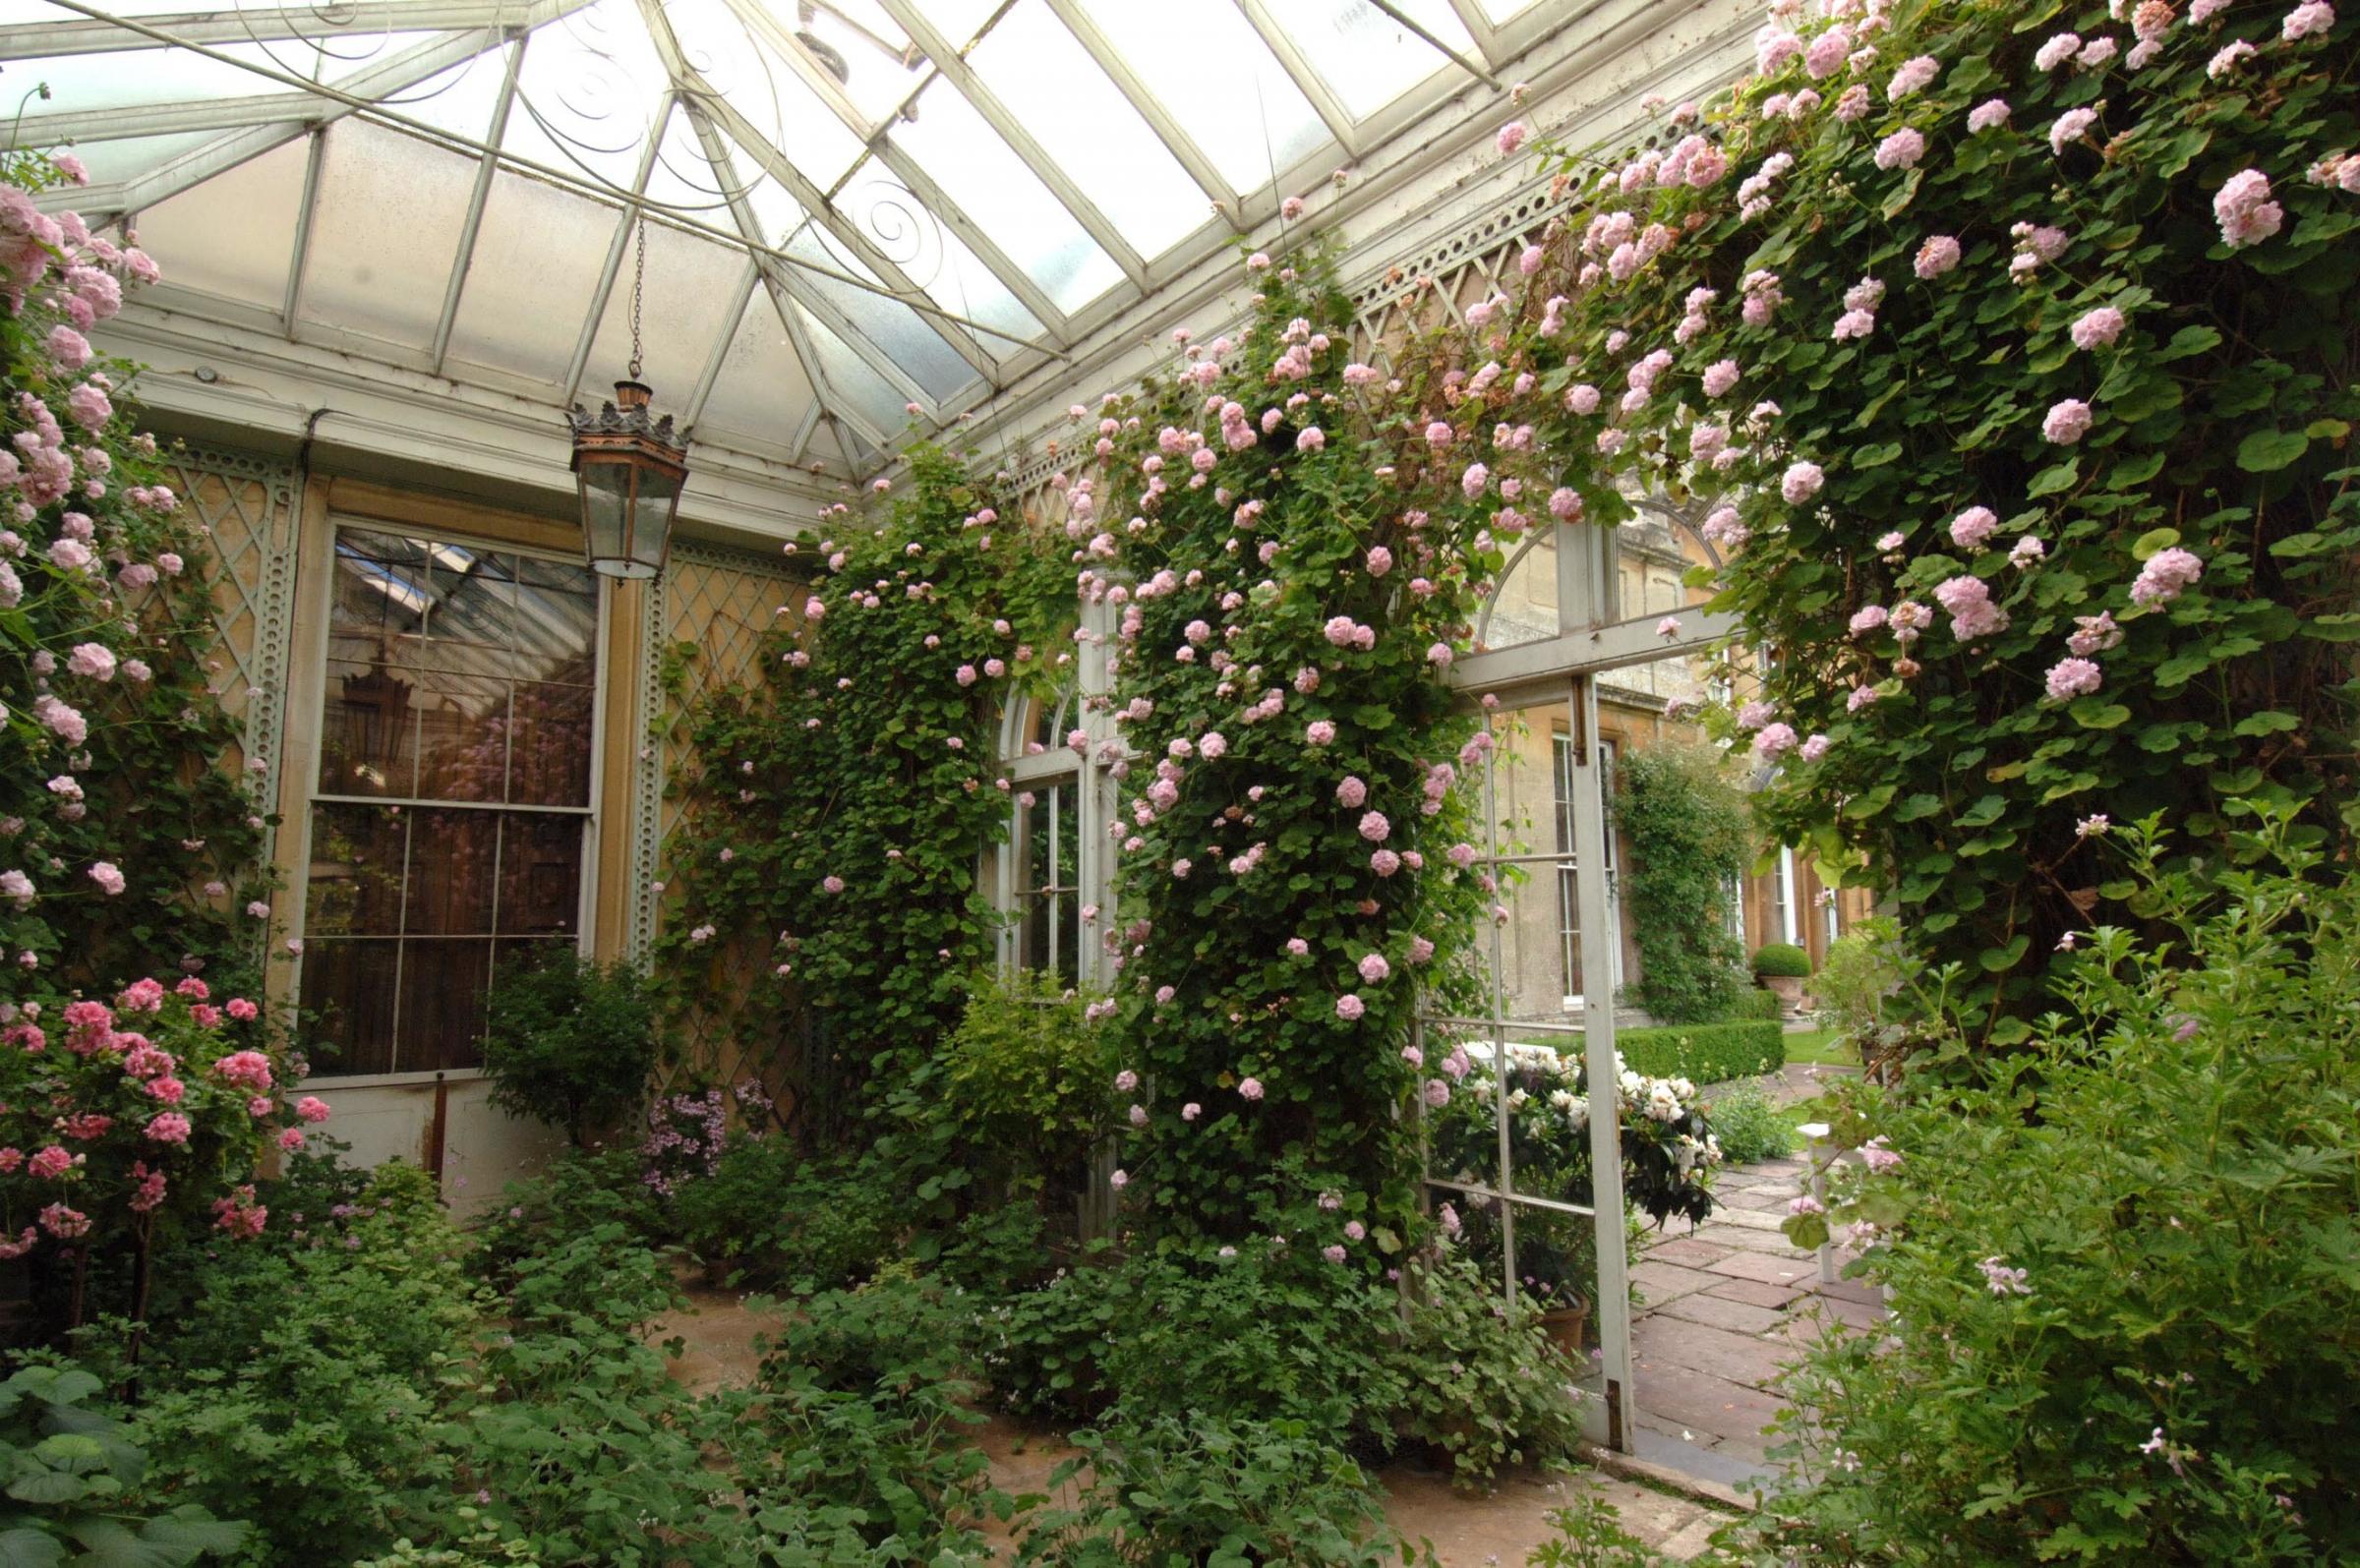 Pic by JAY WILLIAMS of Bristol. Tel 01275 880579 / 07770 576076, pix@jaywilliams.co.uk Pic shows the conservatory at Badminton House, Glos